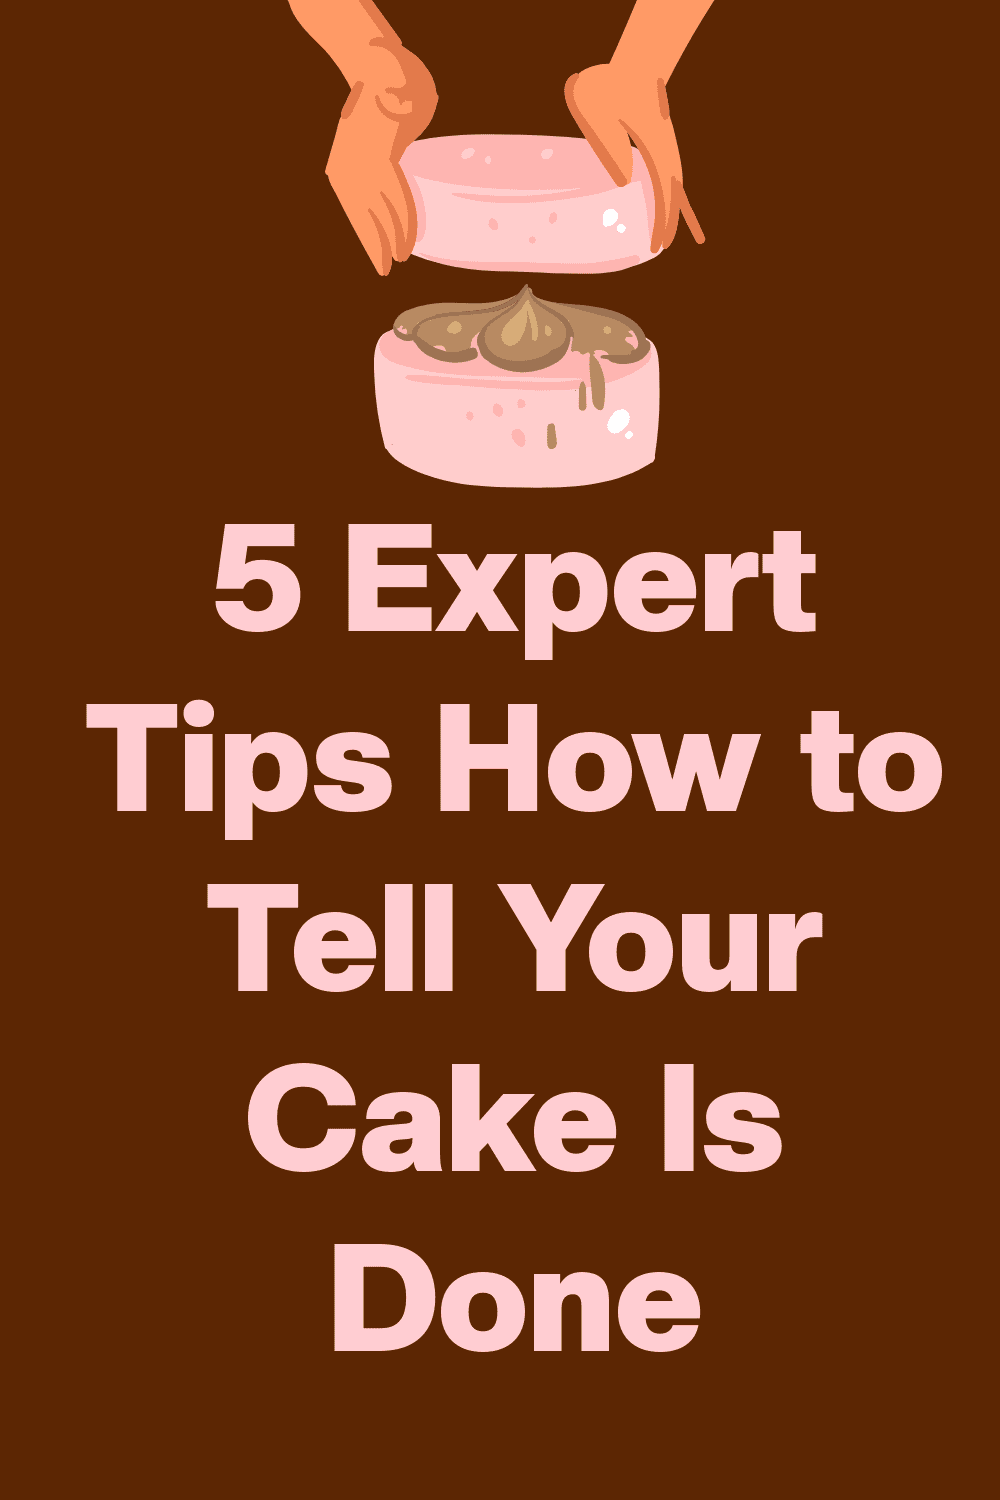 5 Expert Tips How to Tell Your Cake Is Done